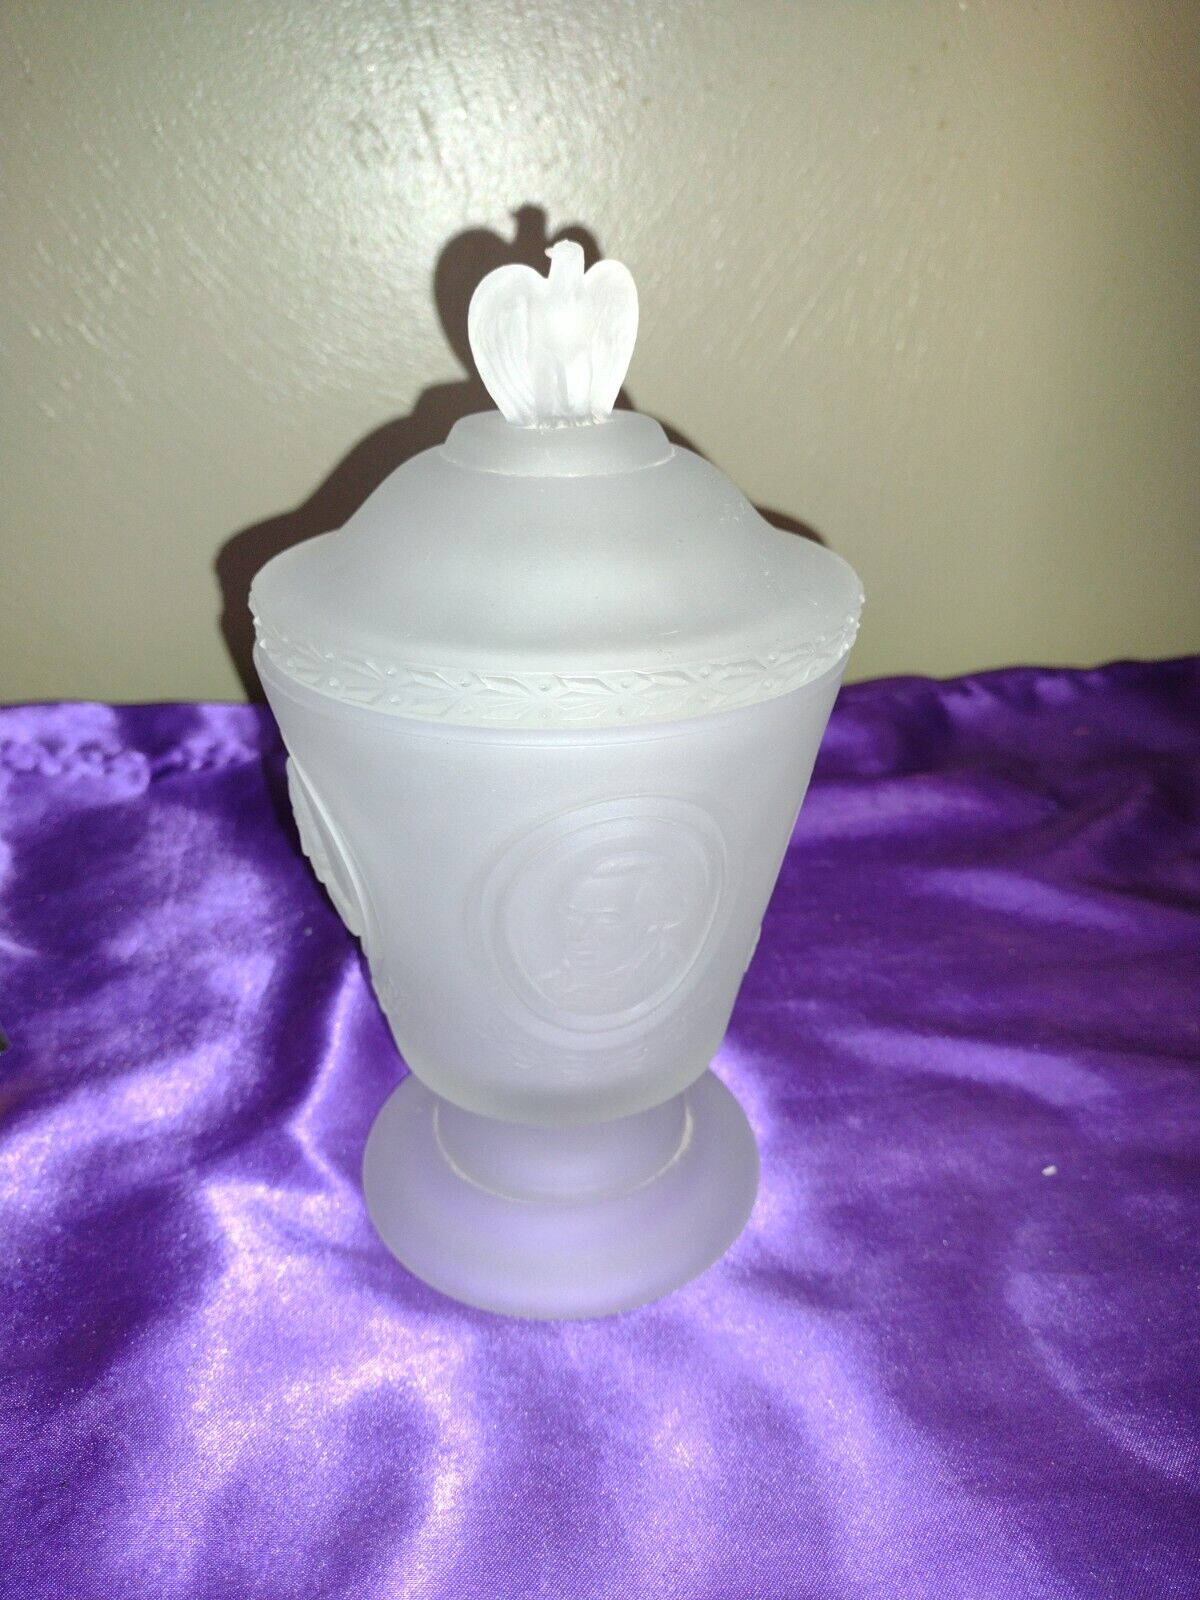 Fenton Satin Glass Jar features images of four presidents & eagle on Lid